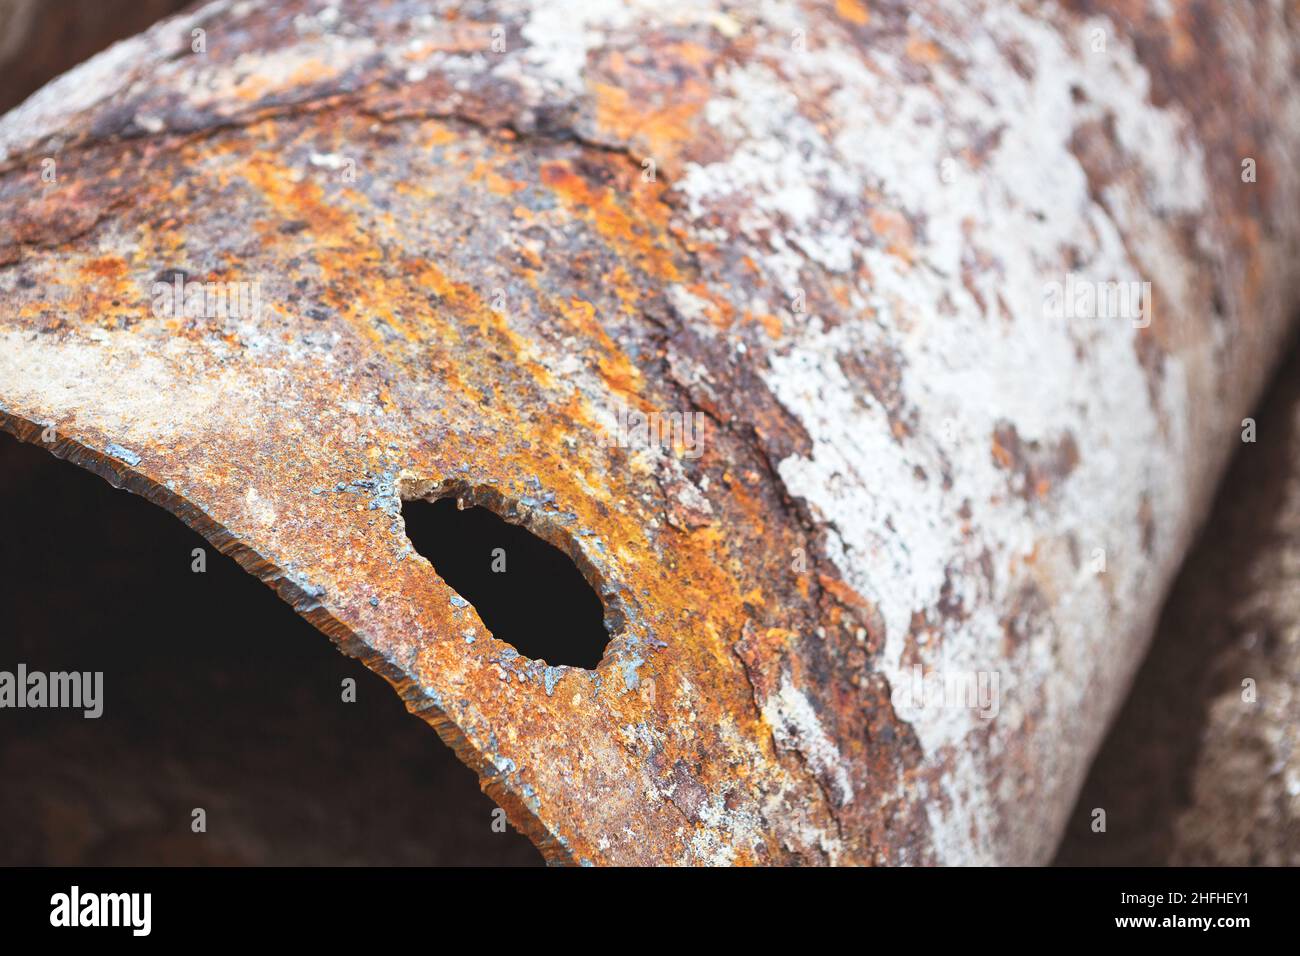 Fragments of old large water pipes. After many years of operation, corroded metal pipe destroyed. Rusty steel tube with holes metal corrosion. Selecti Stock Photo